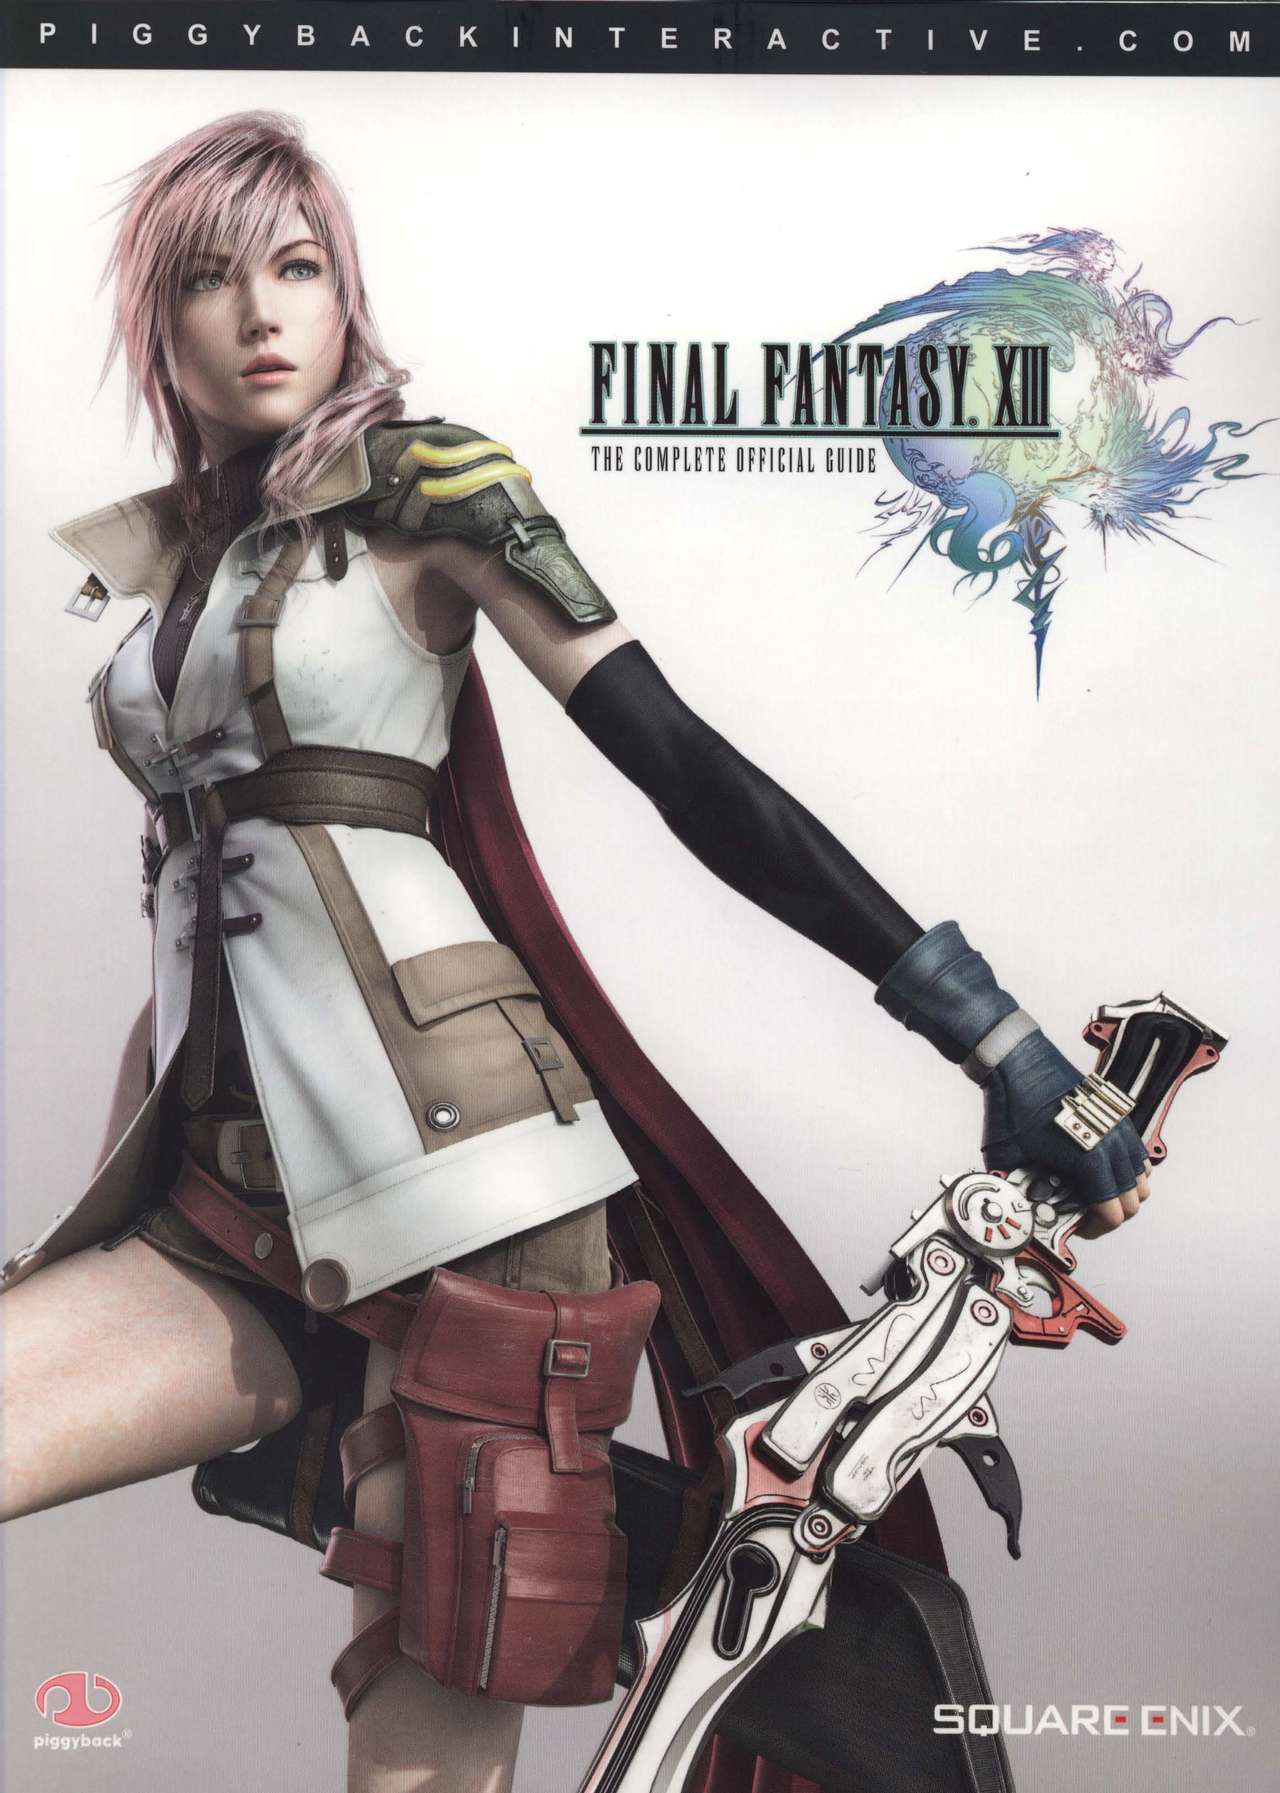 Final Fantasy XIII The complete official guide 000